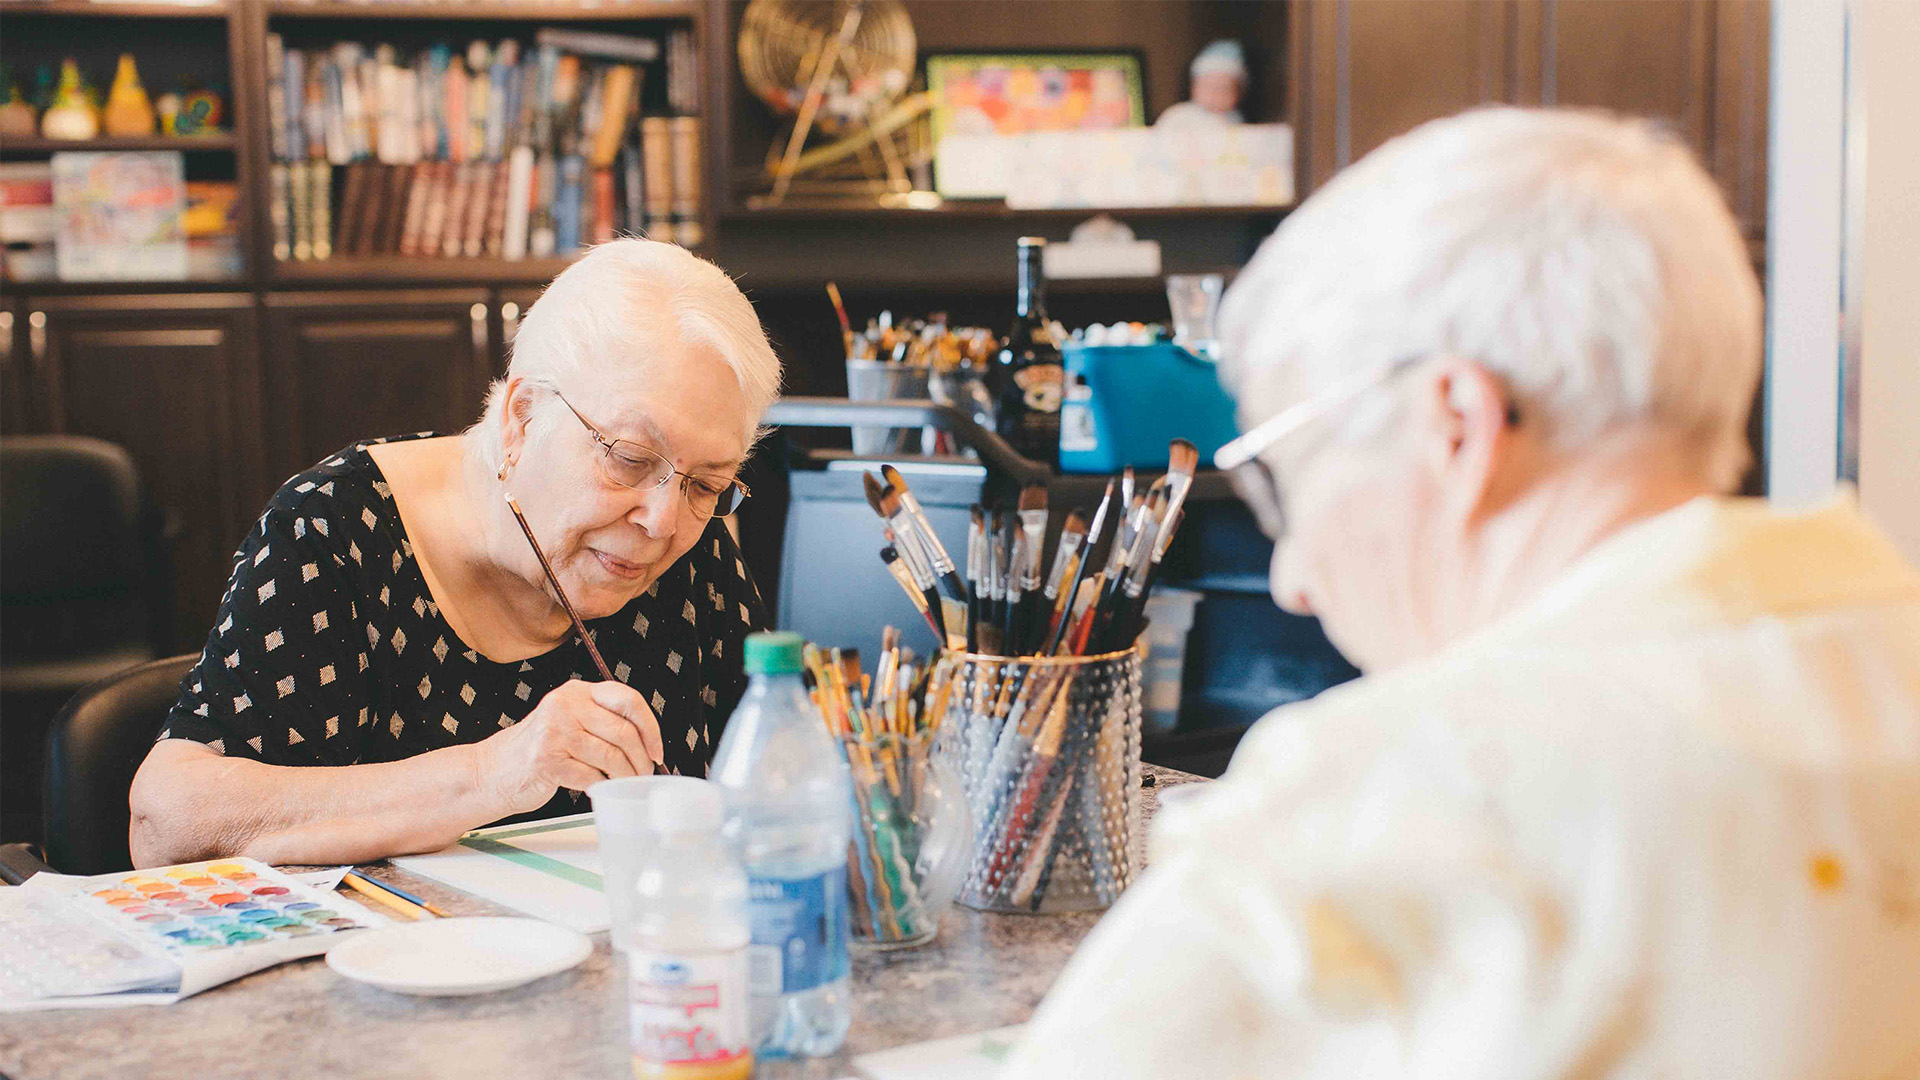 Header image featuring two seniors painting together